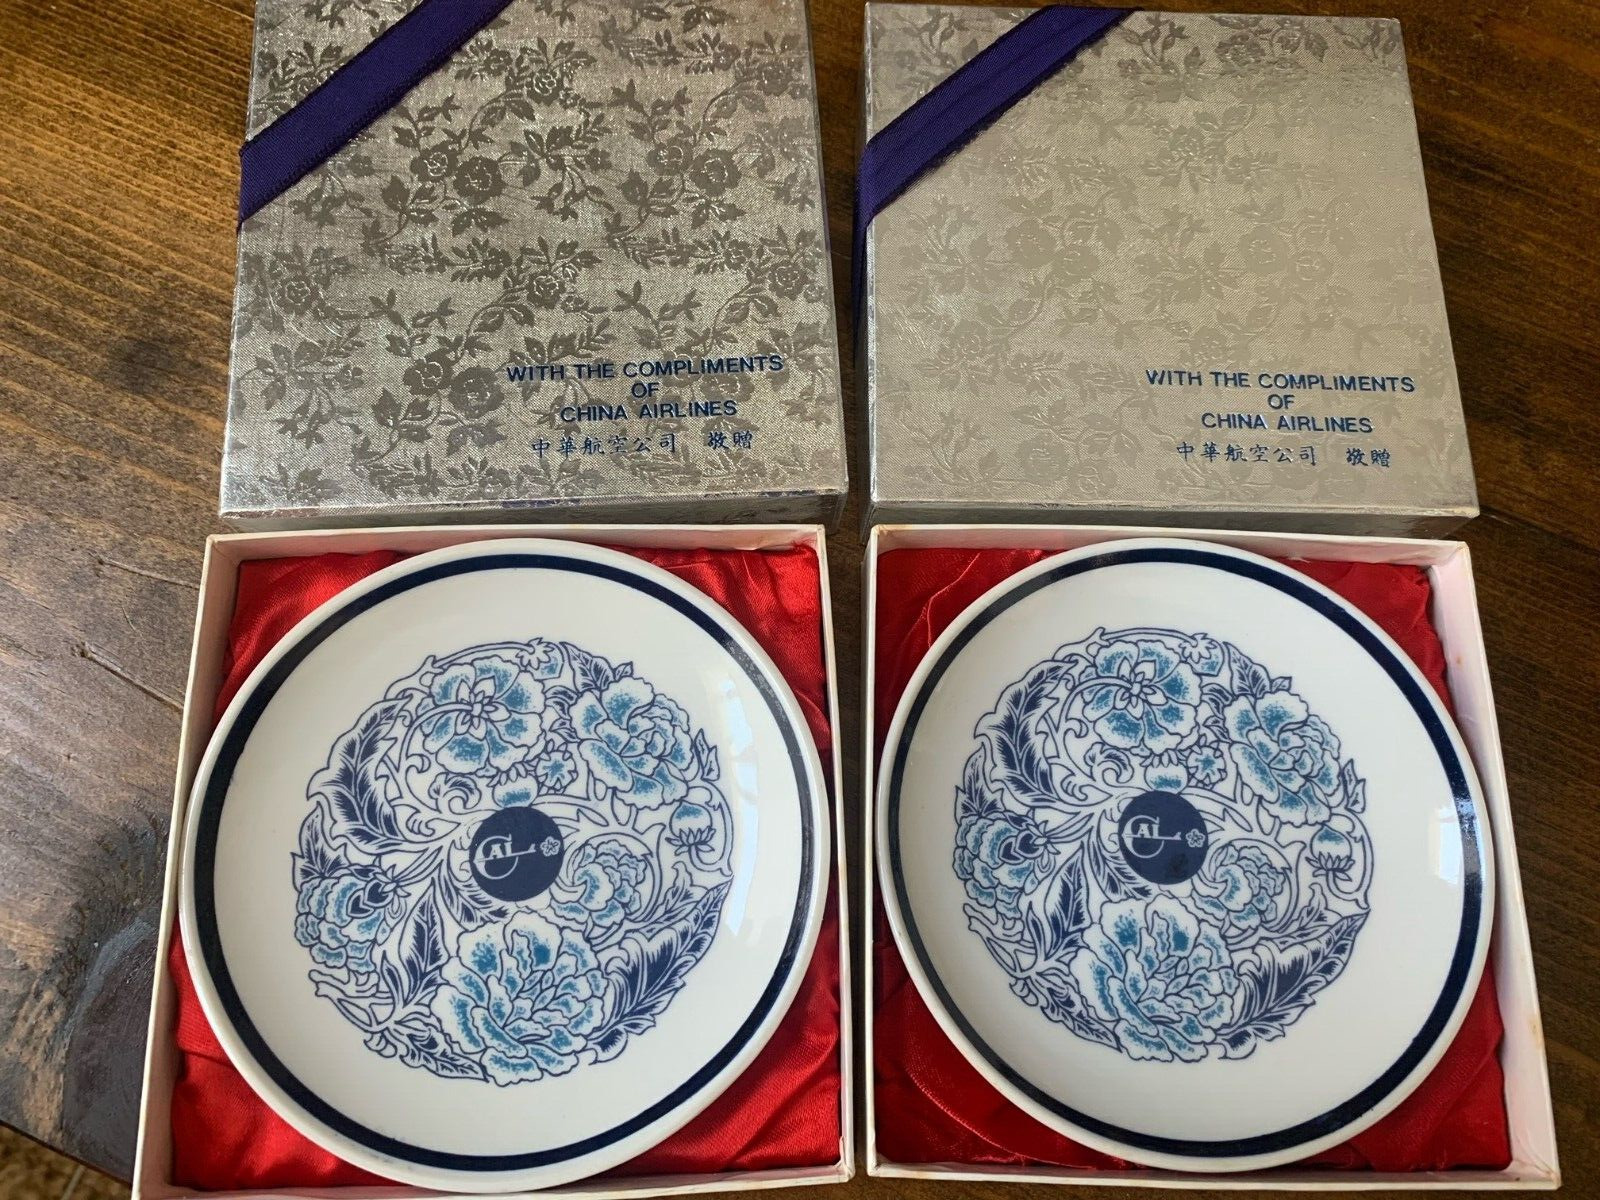 RARE CHINA AIRLINES PLATE IN BOX- SET of 2